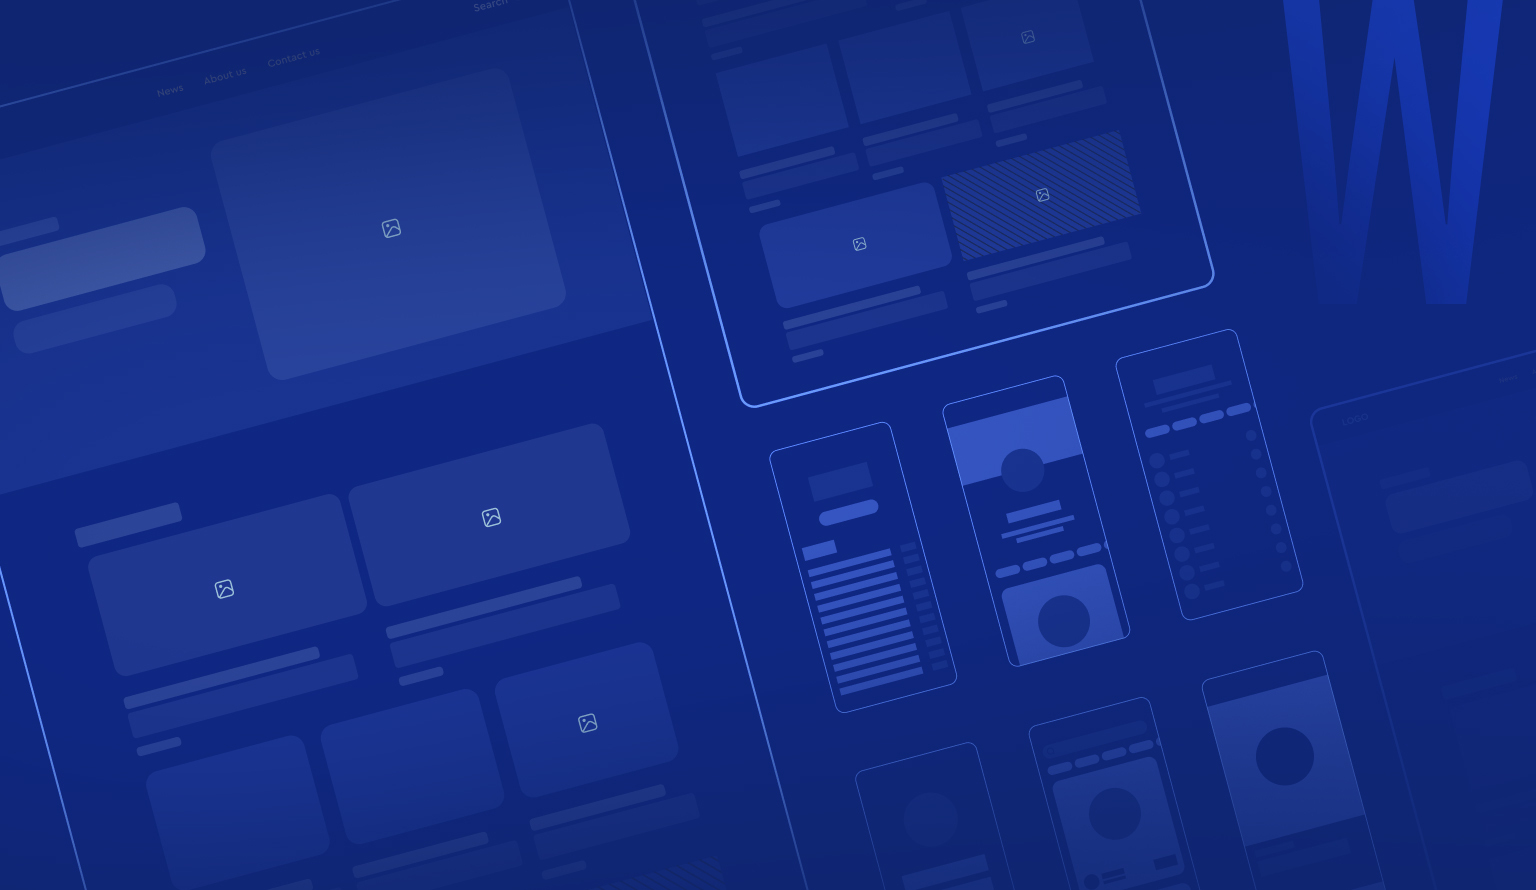 Why should wireframes be a crucial part of your mobile app development strategy?